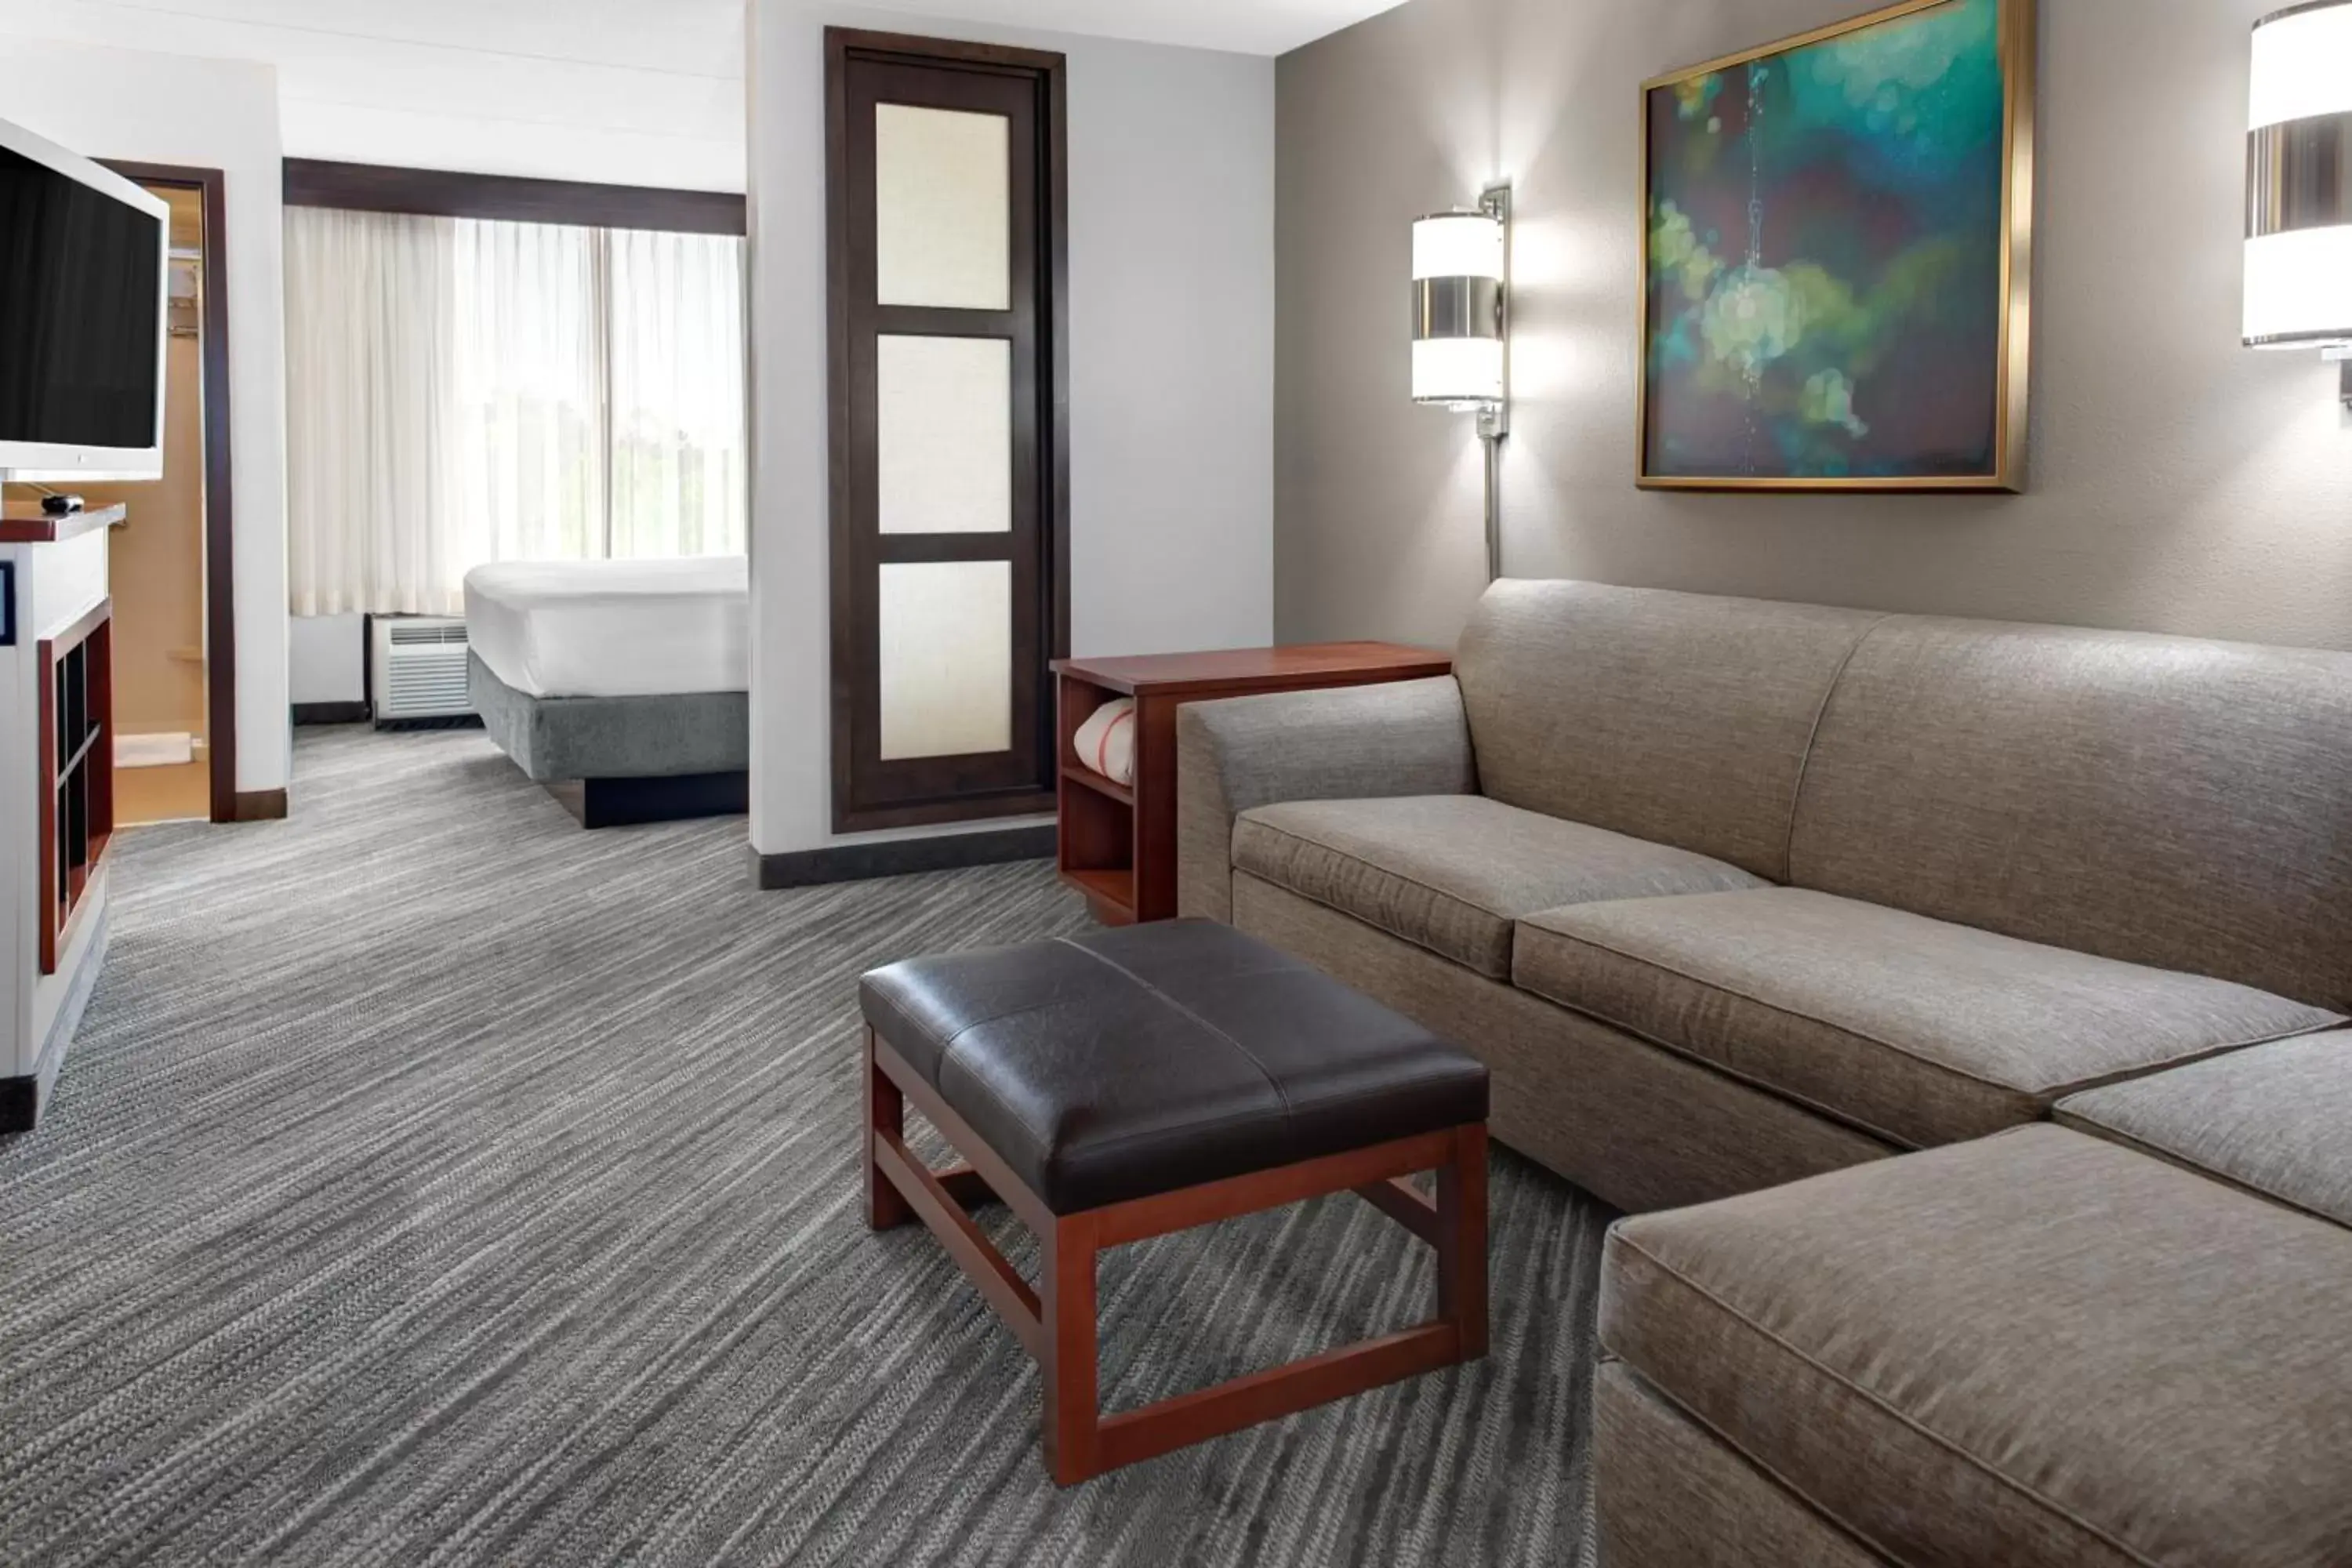 Specialty King Room with Sofa Bed in Hyatt Place Detroit/Livonia